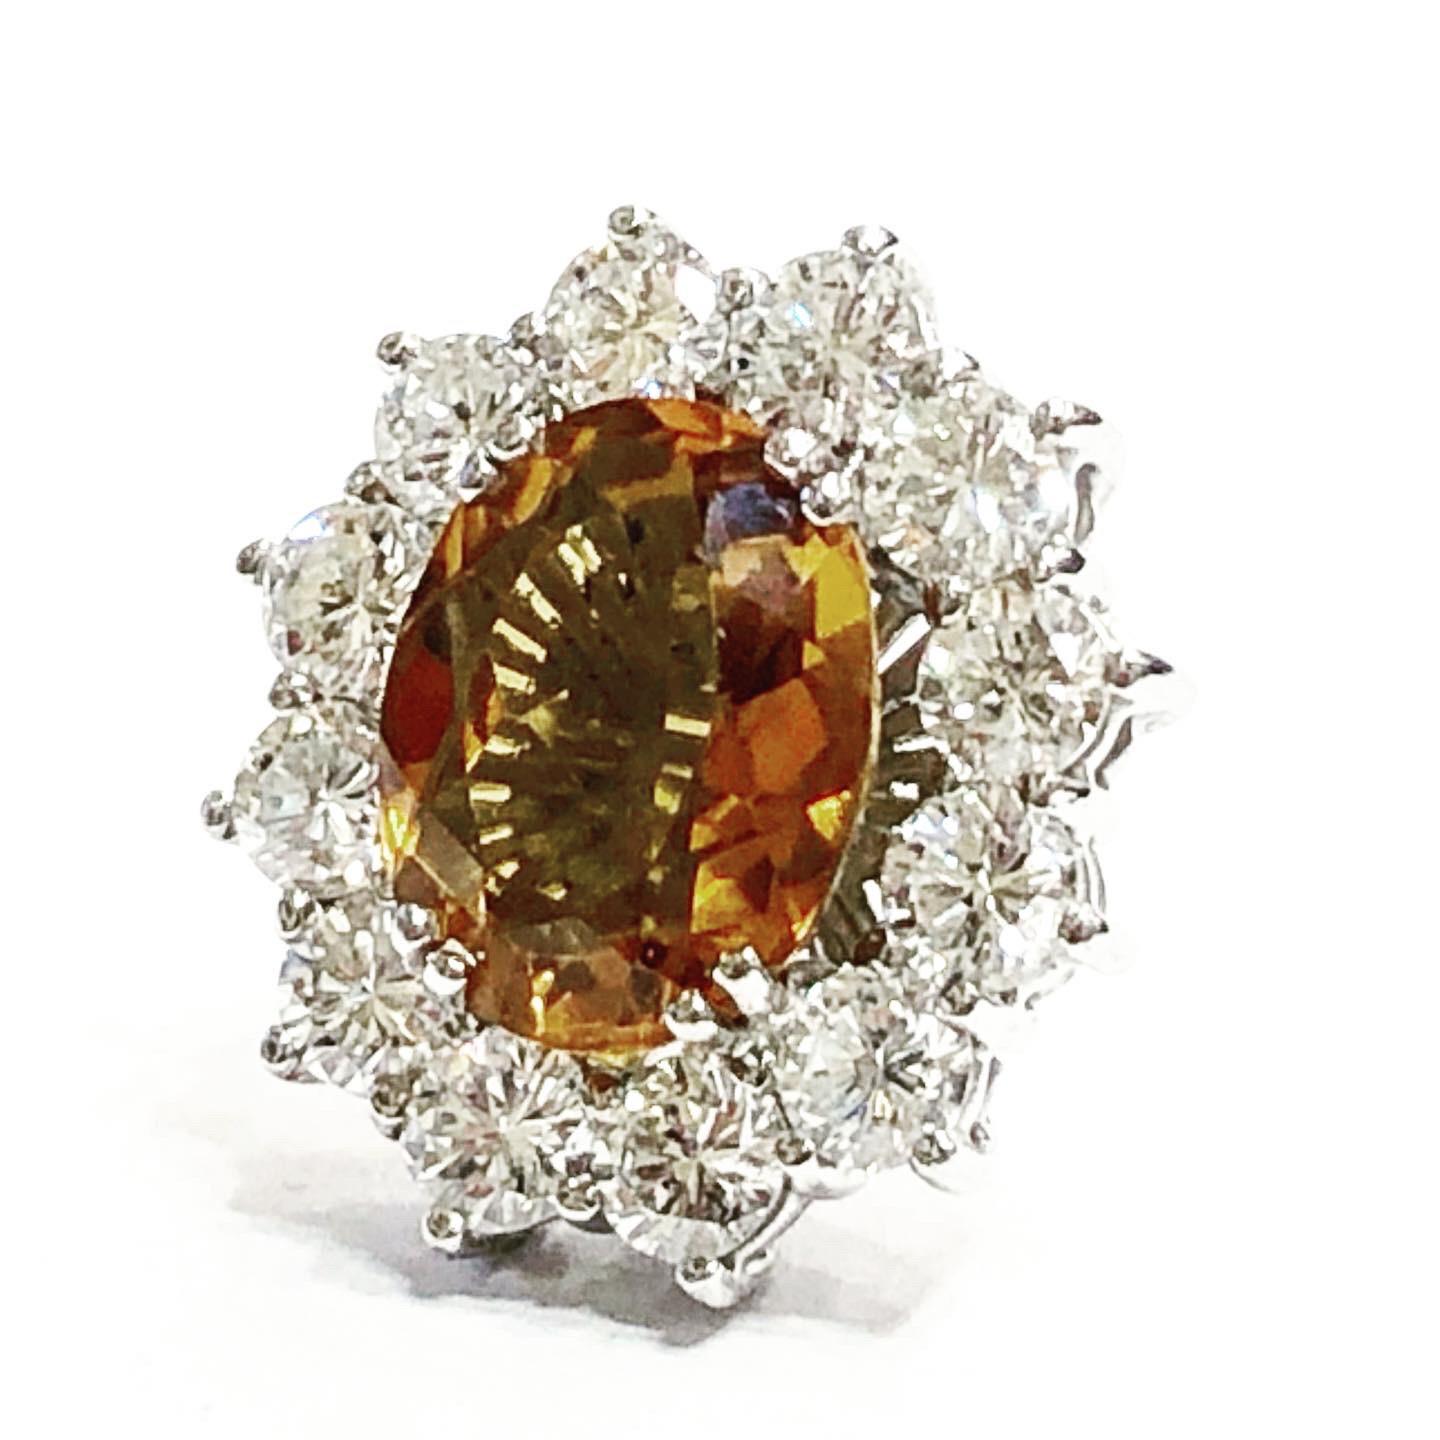 1950s citrine diamonds 18 karat white gold stud cluster earrings
Stud and clutch system.
Condition: Good.
Oval cut citrine.
Brilliant cut diamond frame .
Diamond approximate carat weight: 2.4 carats.
Citrine approximate weight: 5 carats.
Height: 1.7